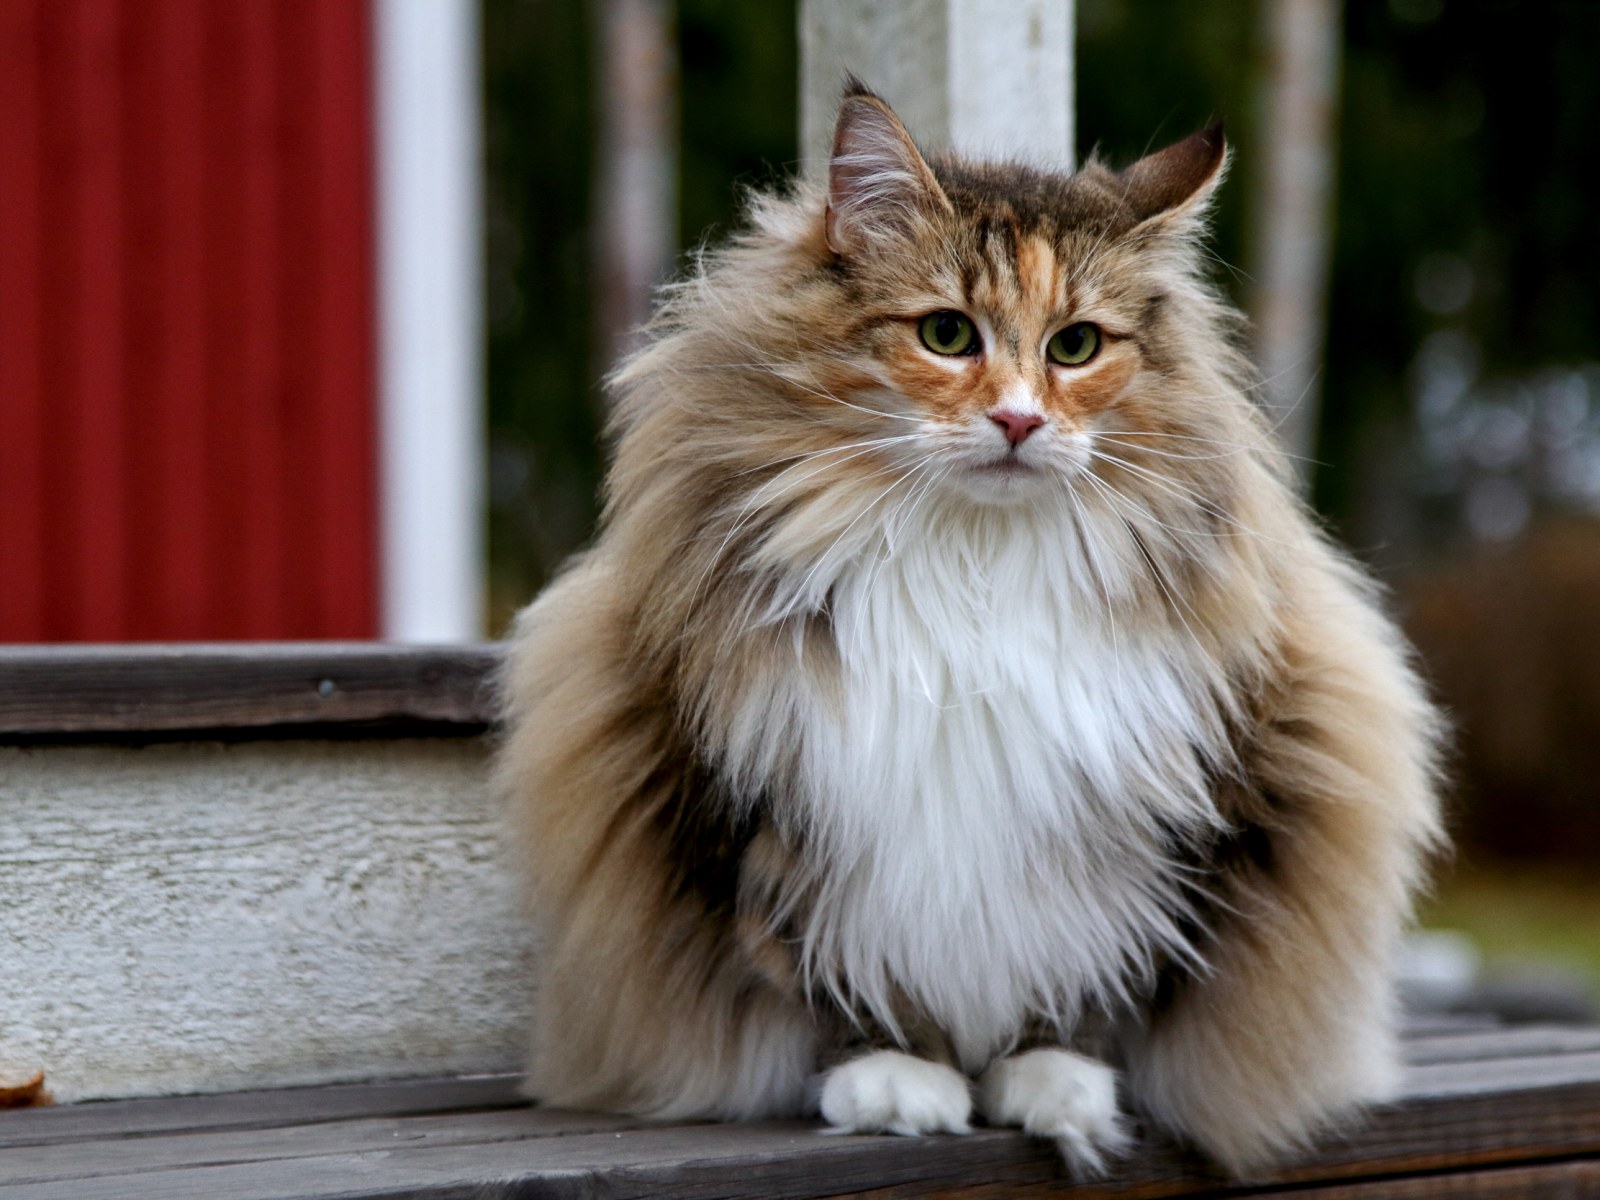 25 Cat Breeds With the Longest Life Spans